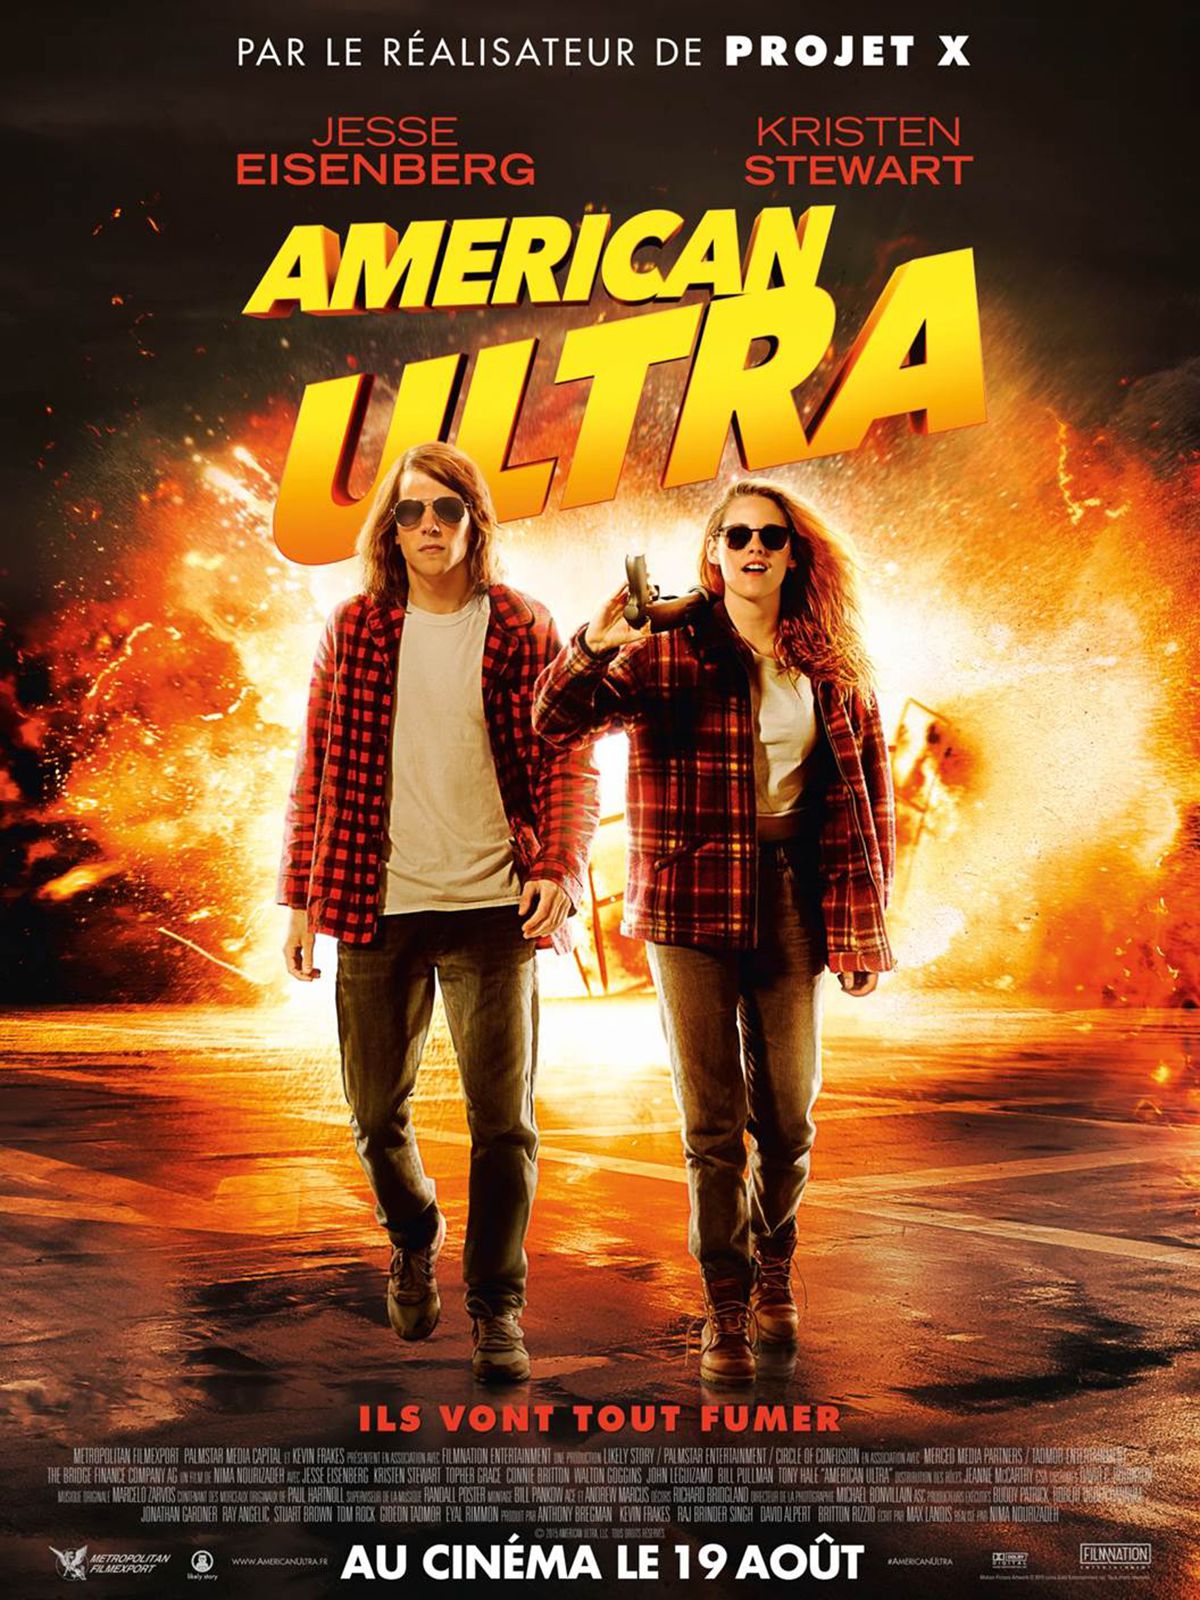 American Ultra - Film (2015) streaming VF gratuit complet